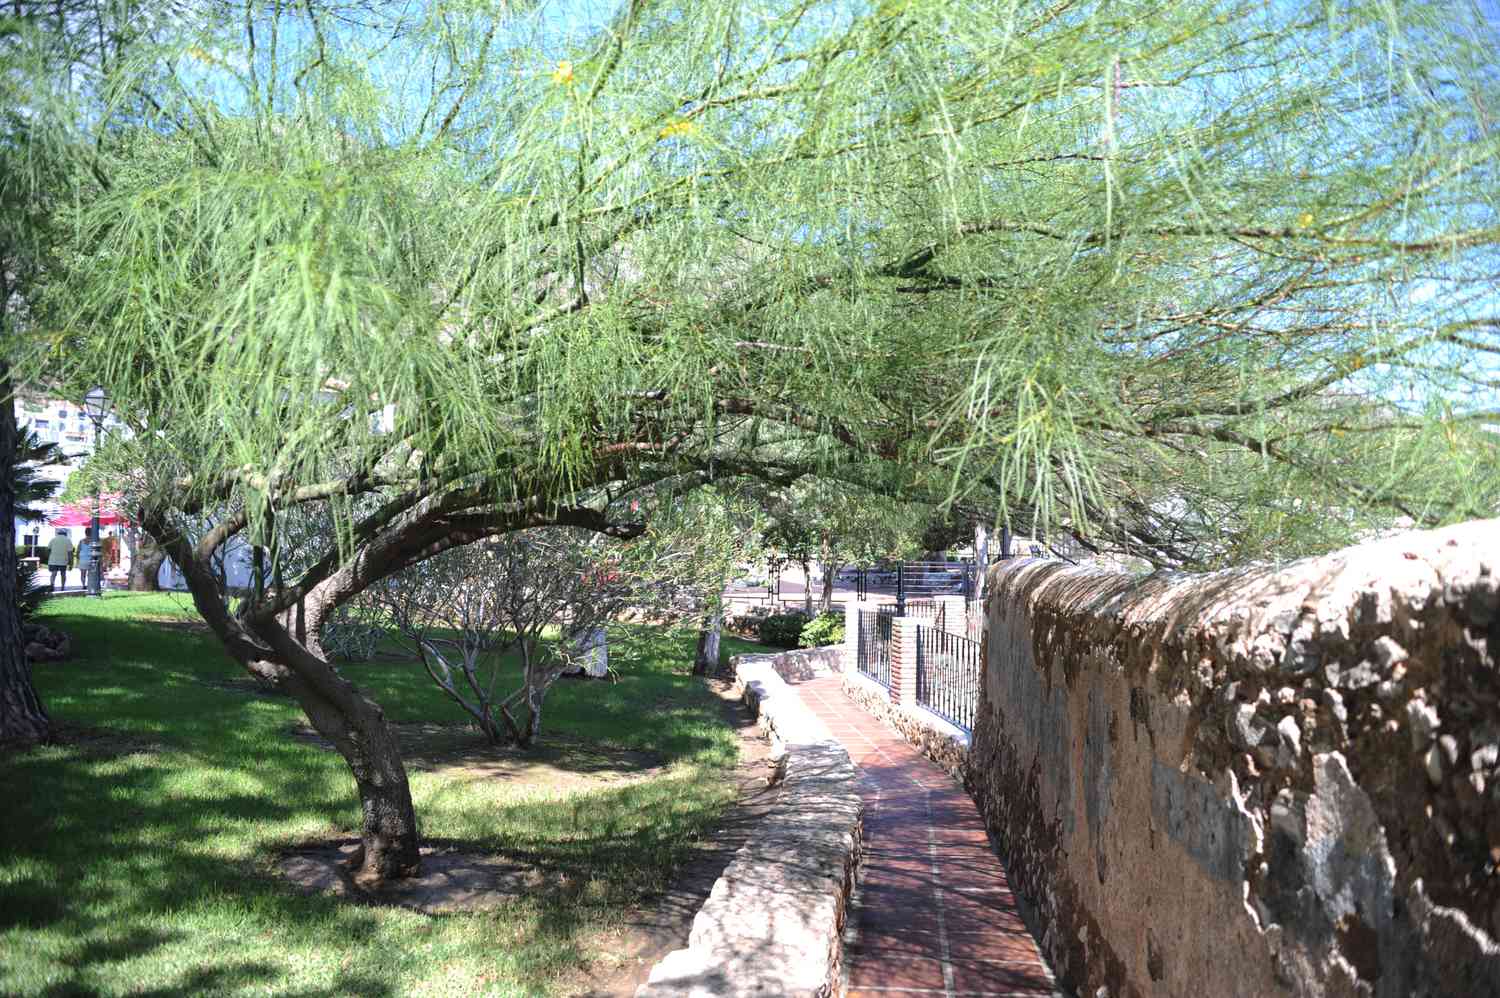 Palo verde tree with extending branches over pathway and long thin leaves